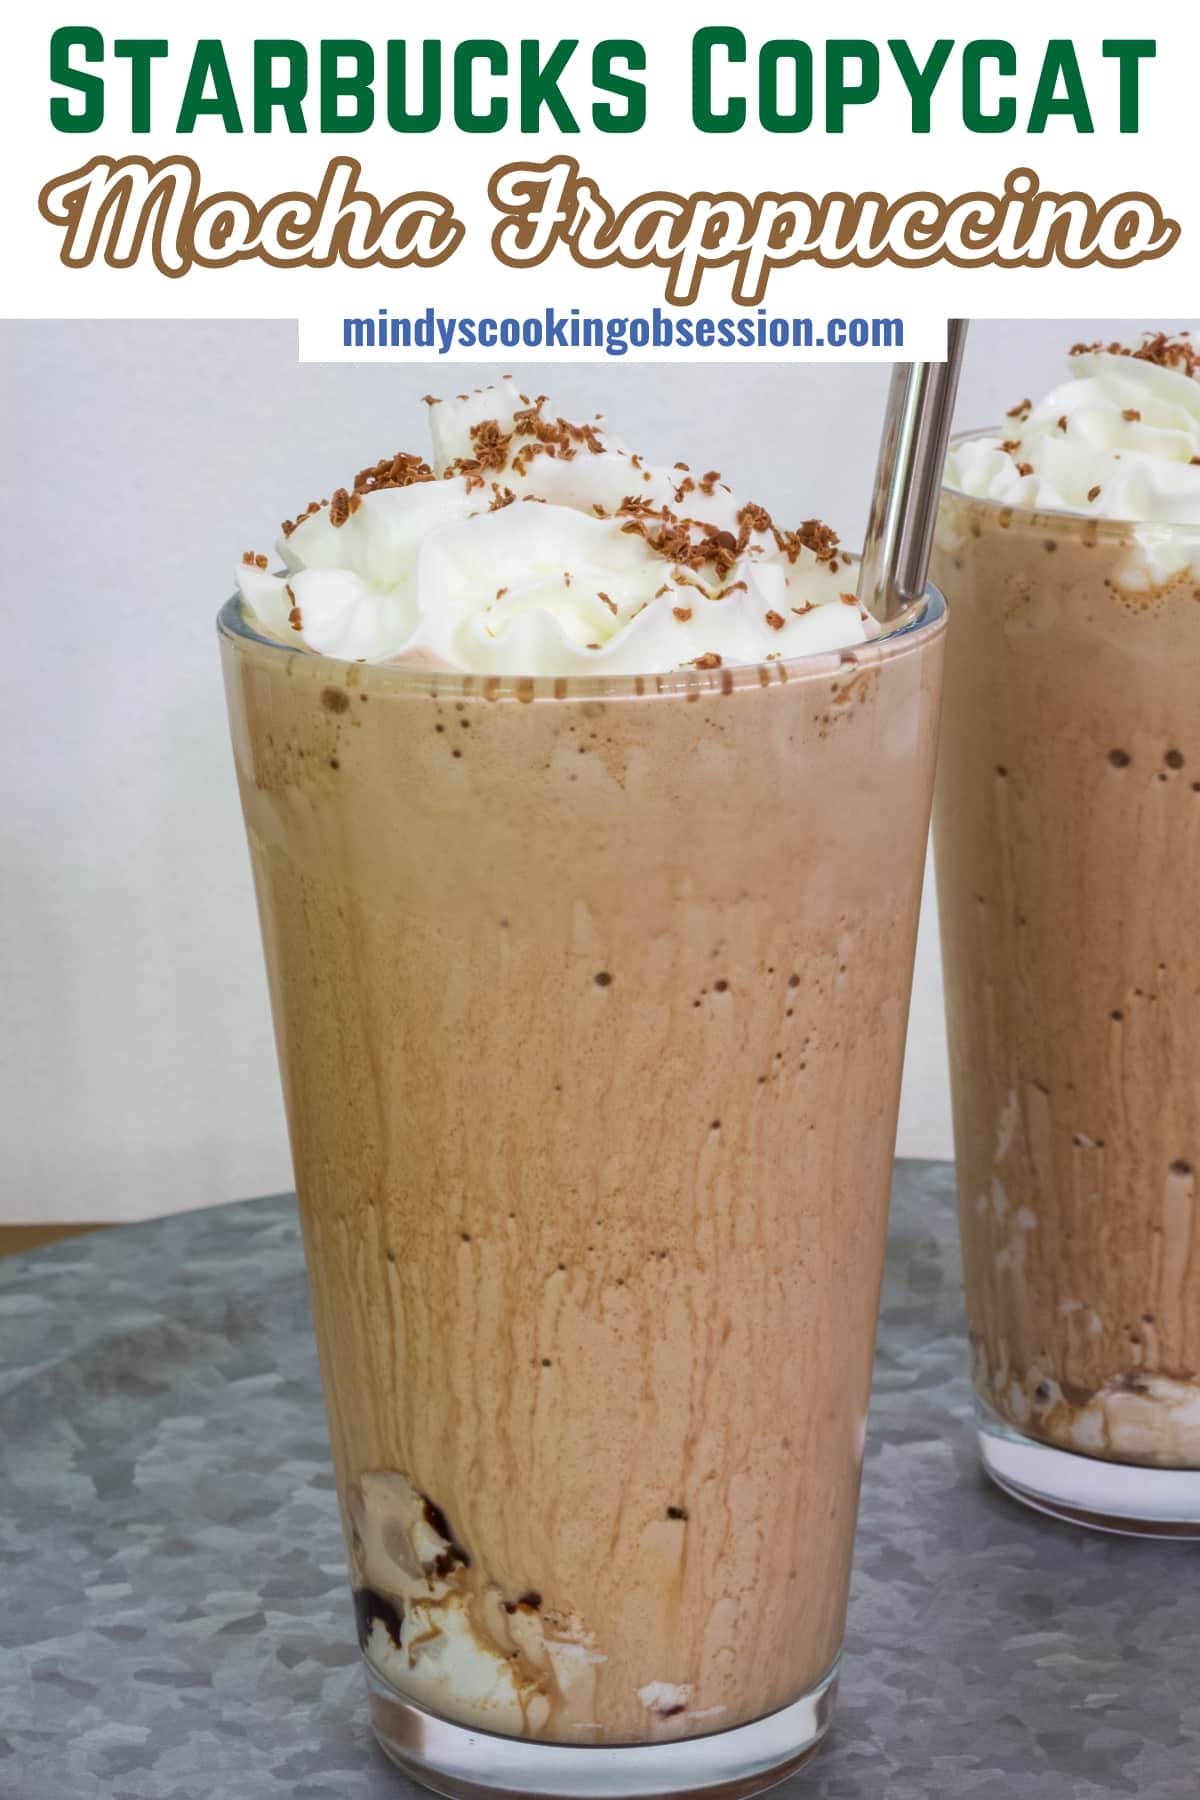 Making a Starbucks Frappuccino at home has never been easier with our easy and delicious recipe. Instant coffee granules, milk, chocolate sauce and ice are blended together and then topped with whipped cream and shaved chocolate. It's the perfect frozen coffee drink, especially on hot days! via @mindyscookingobsession